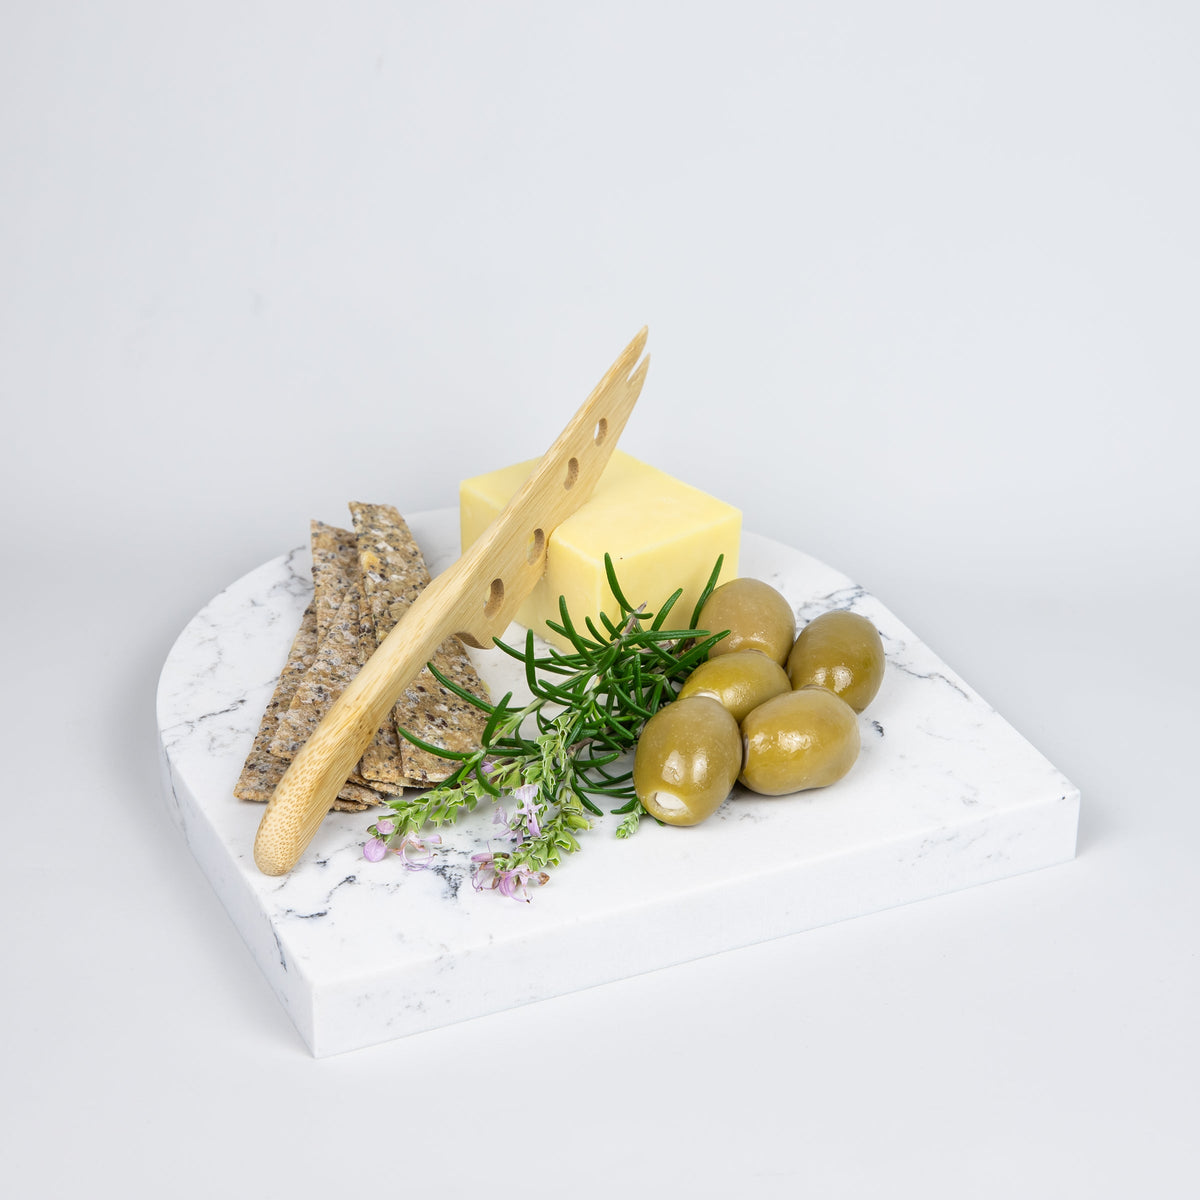 Quartz Arch Platter in Caesarstone White Attica created by Aureliia Collection. Styled with cheese, feta stuffed olives, crackers and rosemary. This decorative quartz serving platter has an alluring combination that overflows with the rush of grey tones, ebbing across a flawless white base. Platters are functional multipurpose items made from quartz which is more resilient and scratch proof in comparison to marble platter.